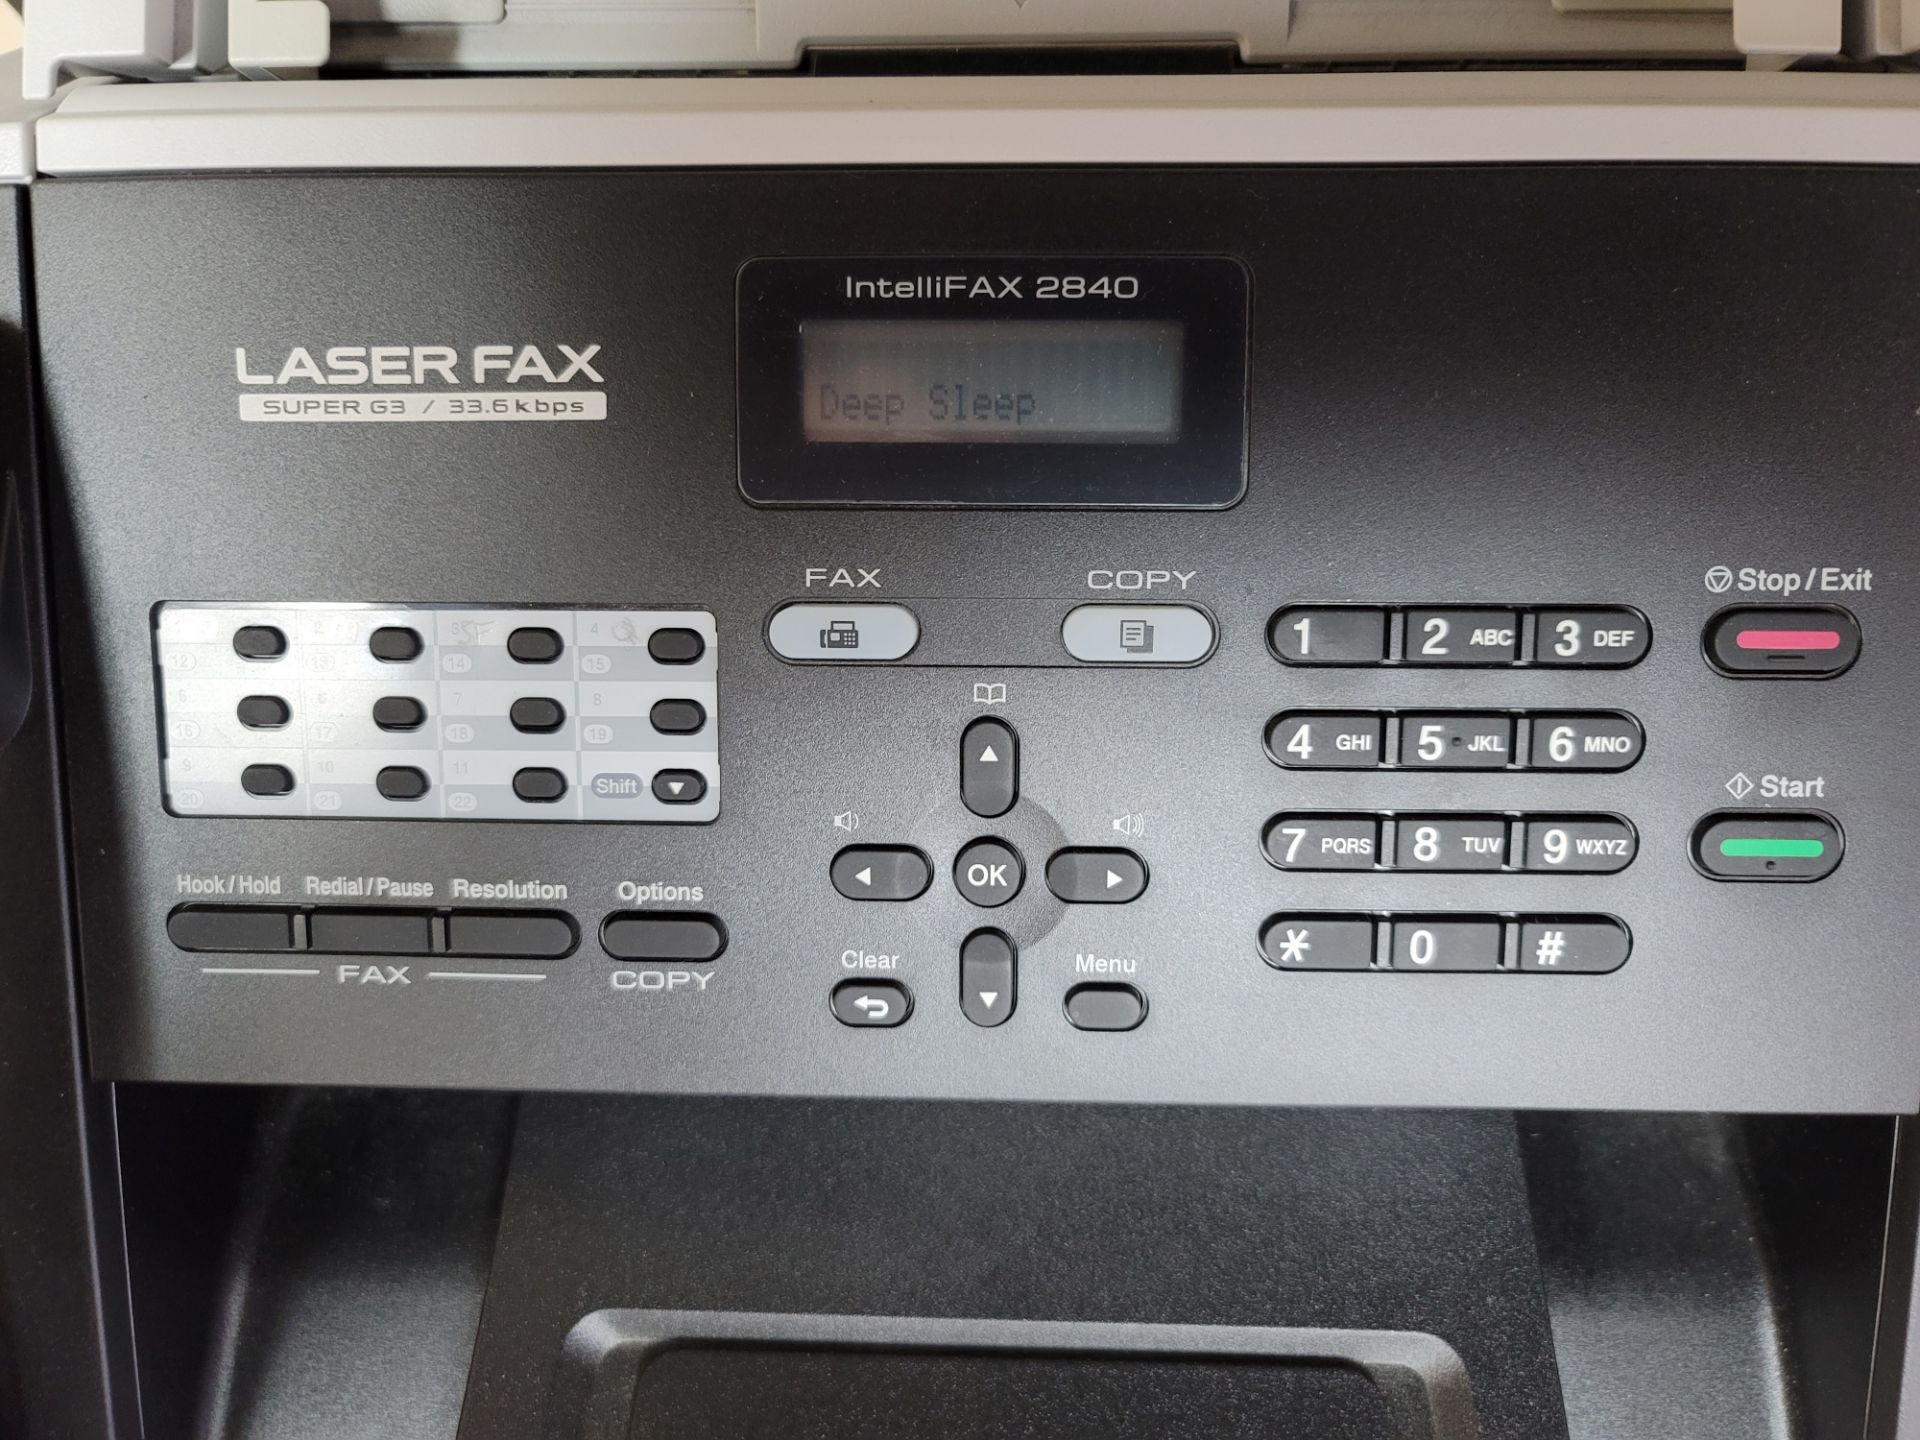 BROTHER LASER FAX, INTELLIFAX 2840 (LOCATION: SAN DIEGO, CA) - Image 2 of 2